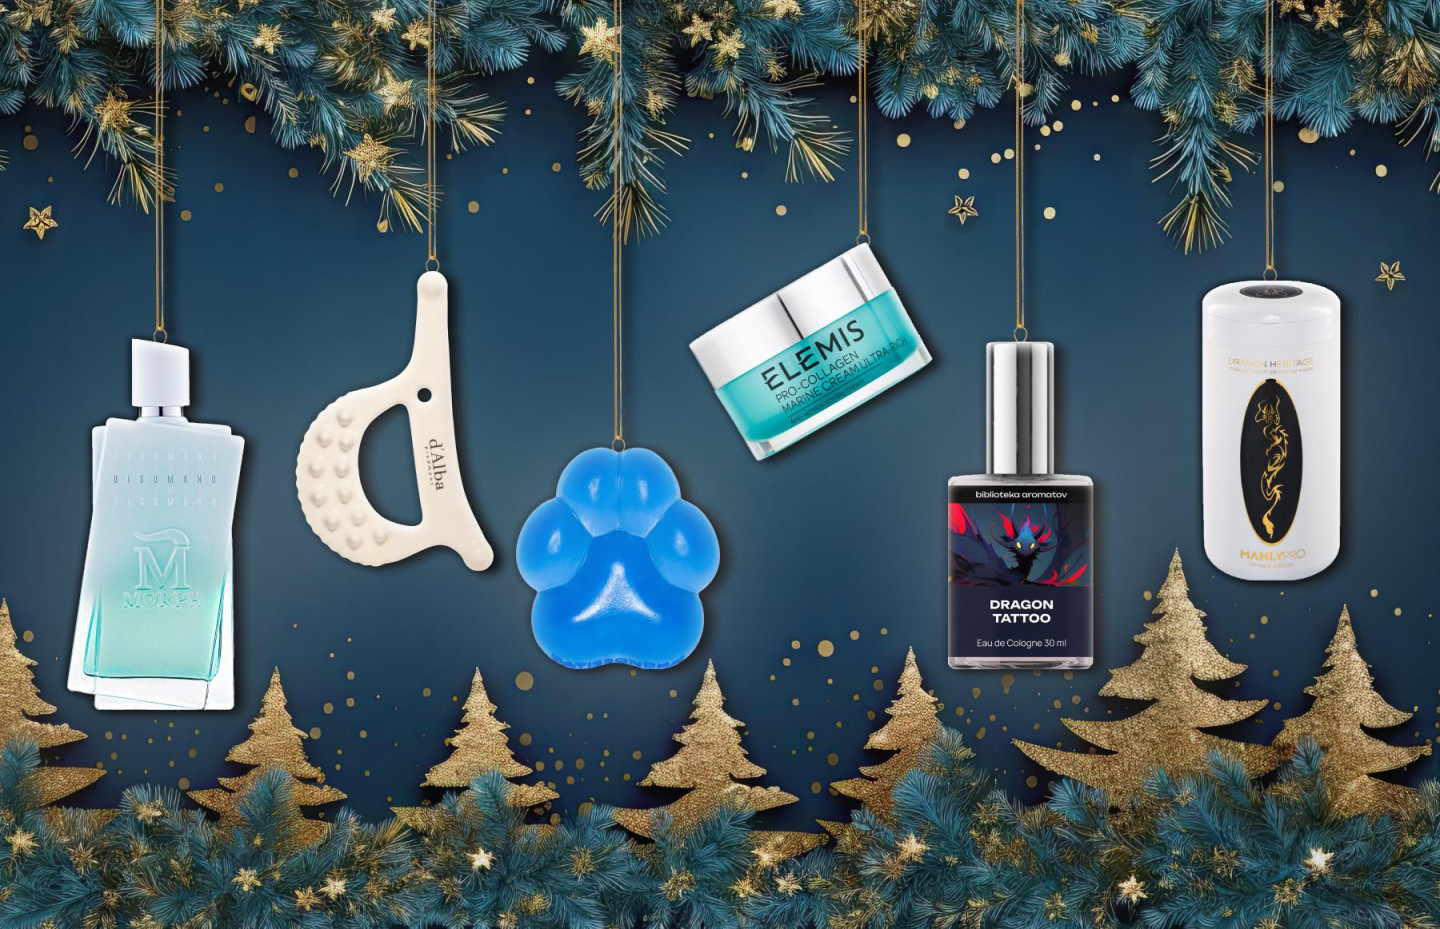 Foot soap, LED mask and “Dragon Tattoo” scent: gifts for beautyholics